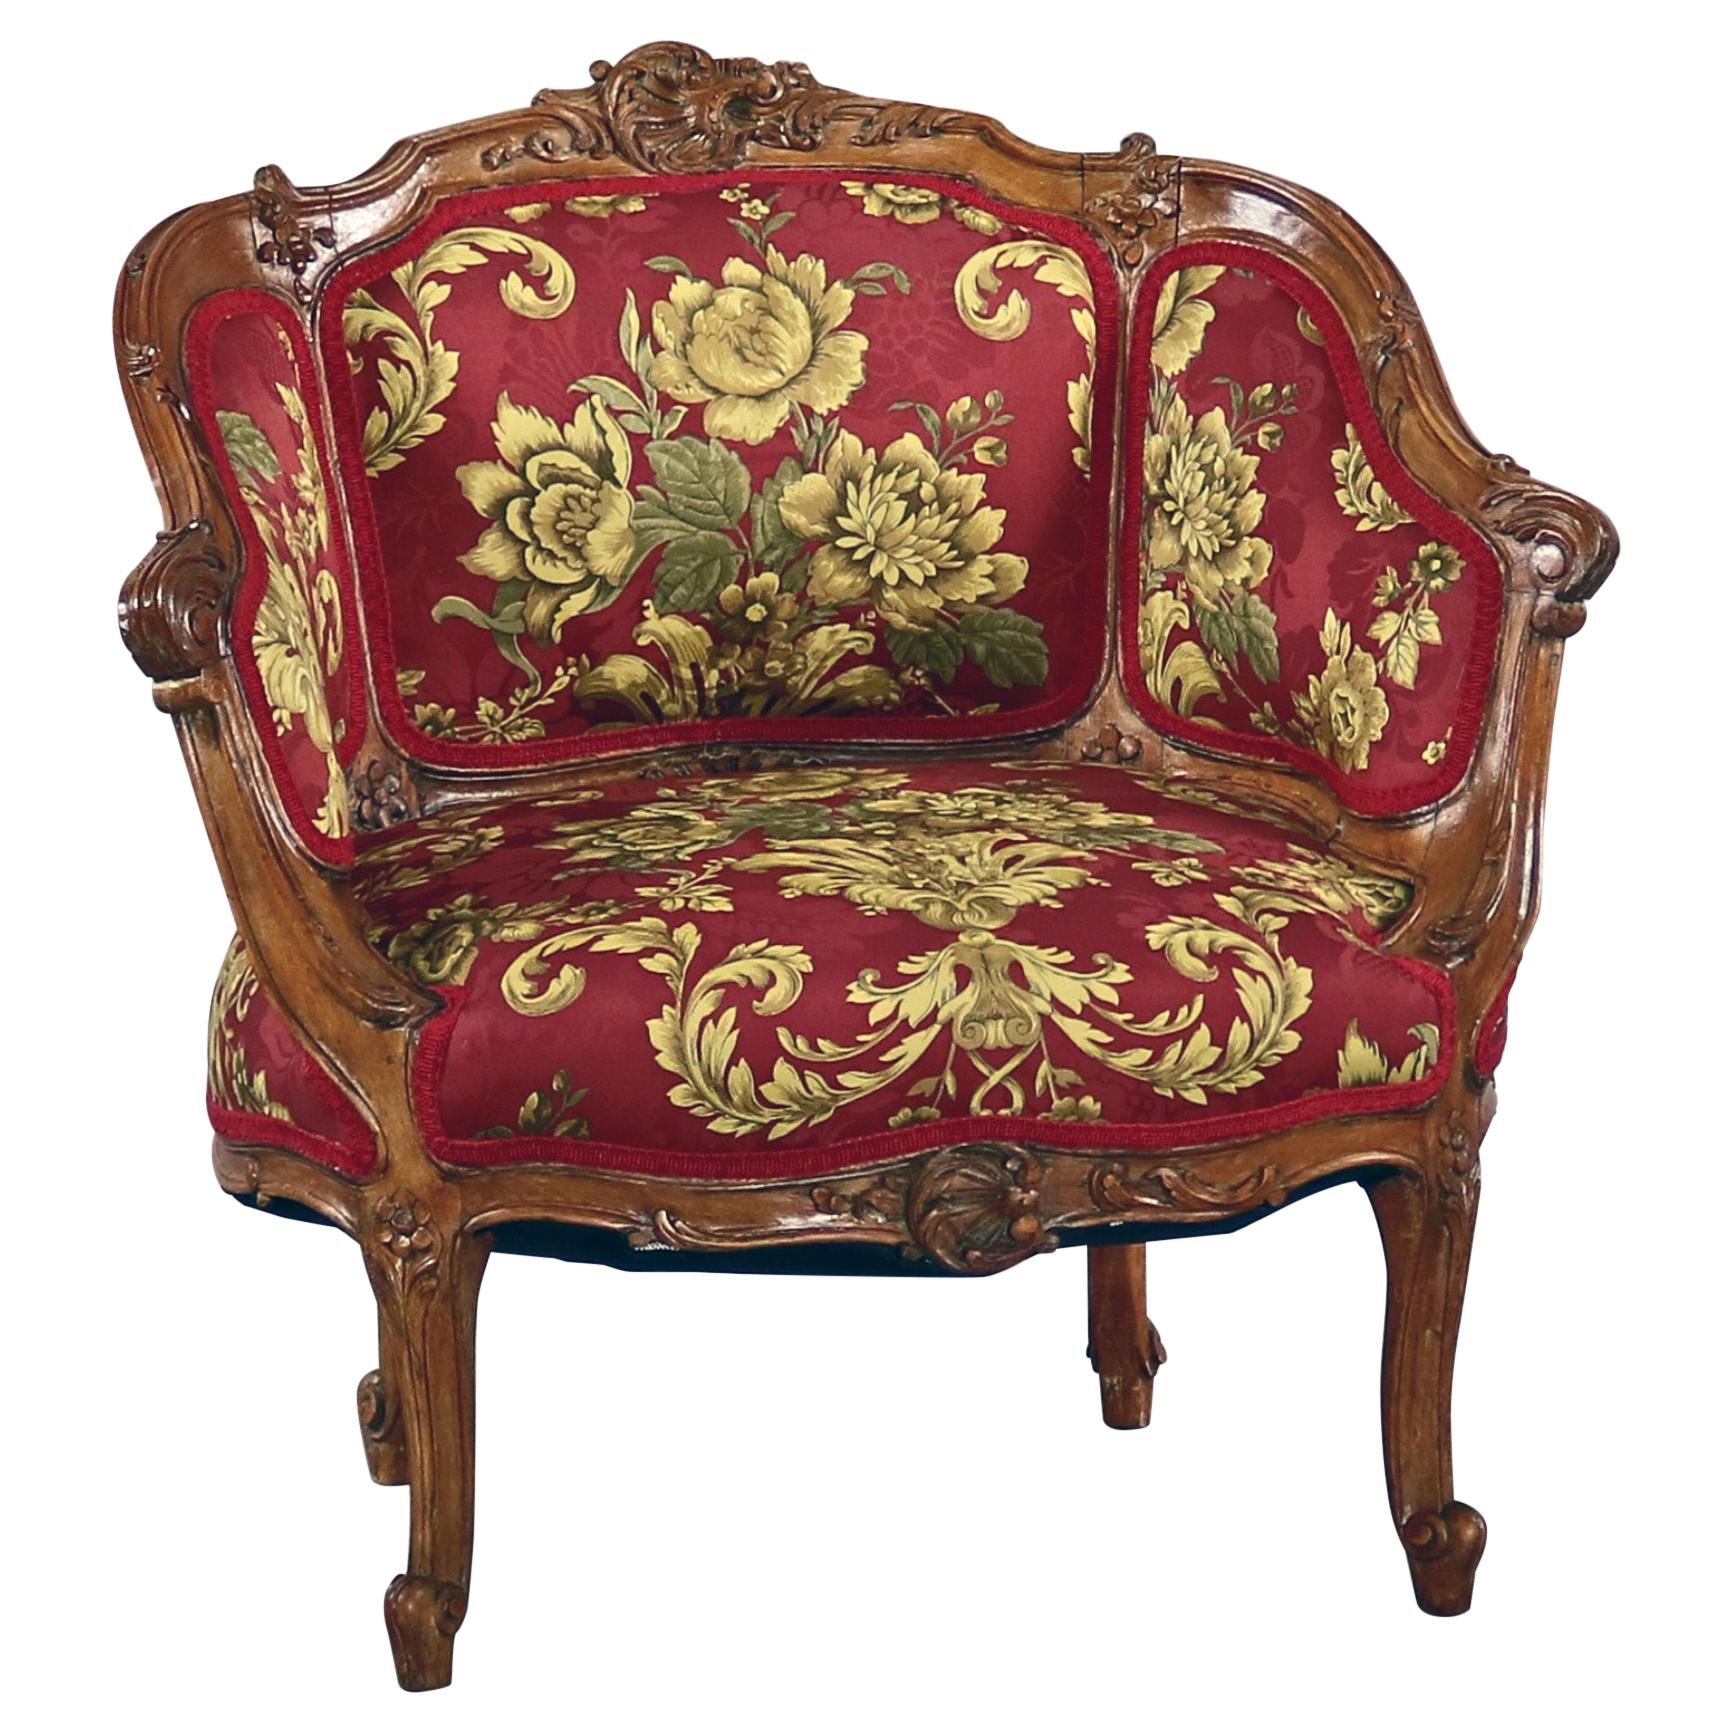 Antique French Louis XV Carved Walnut French Bergère Armchair, 18th Century